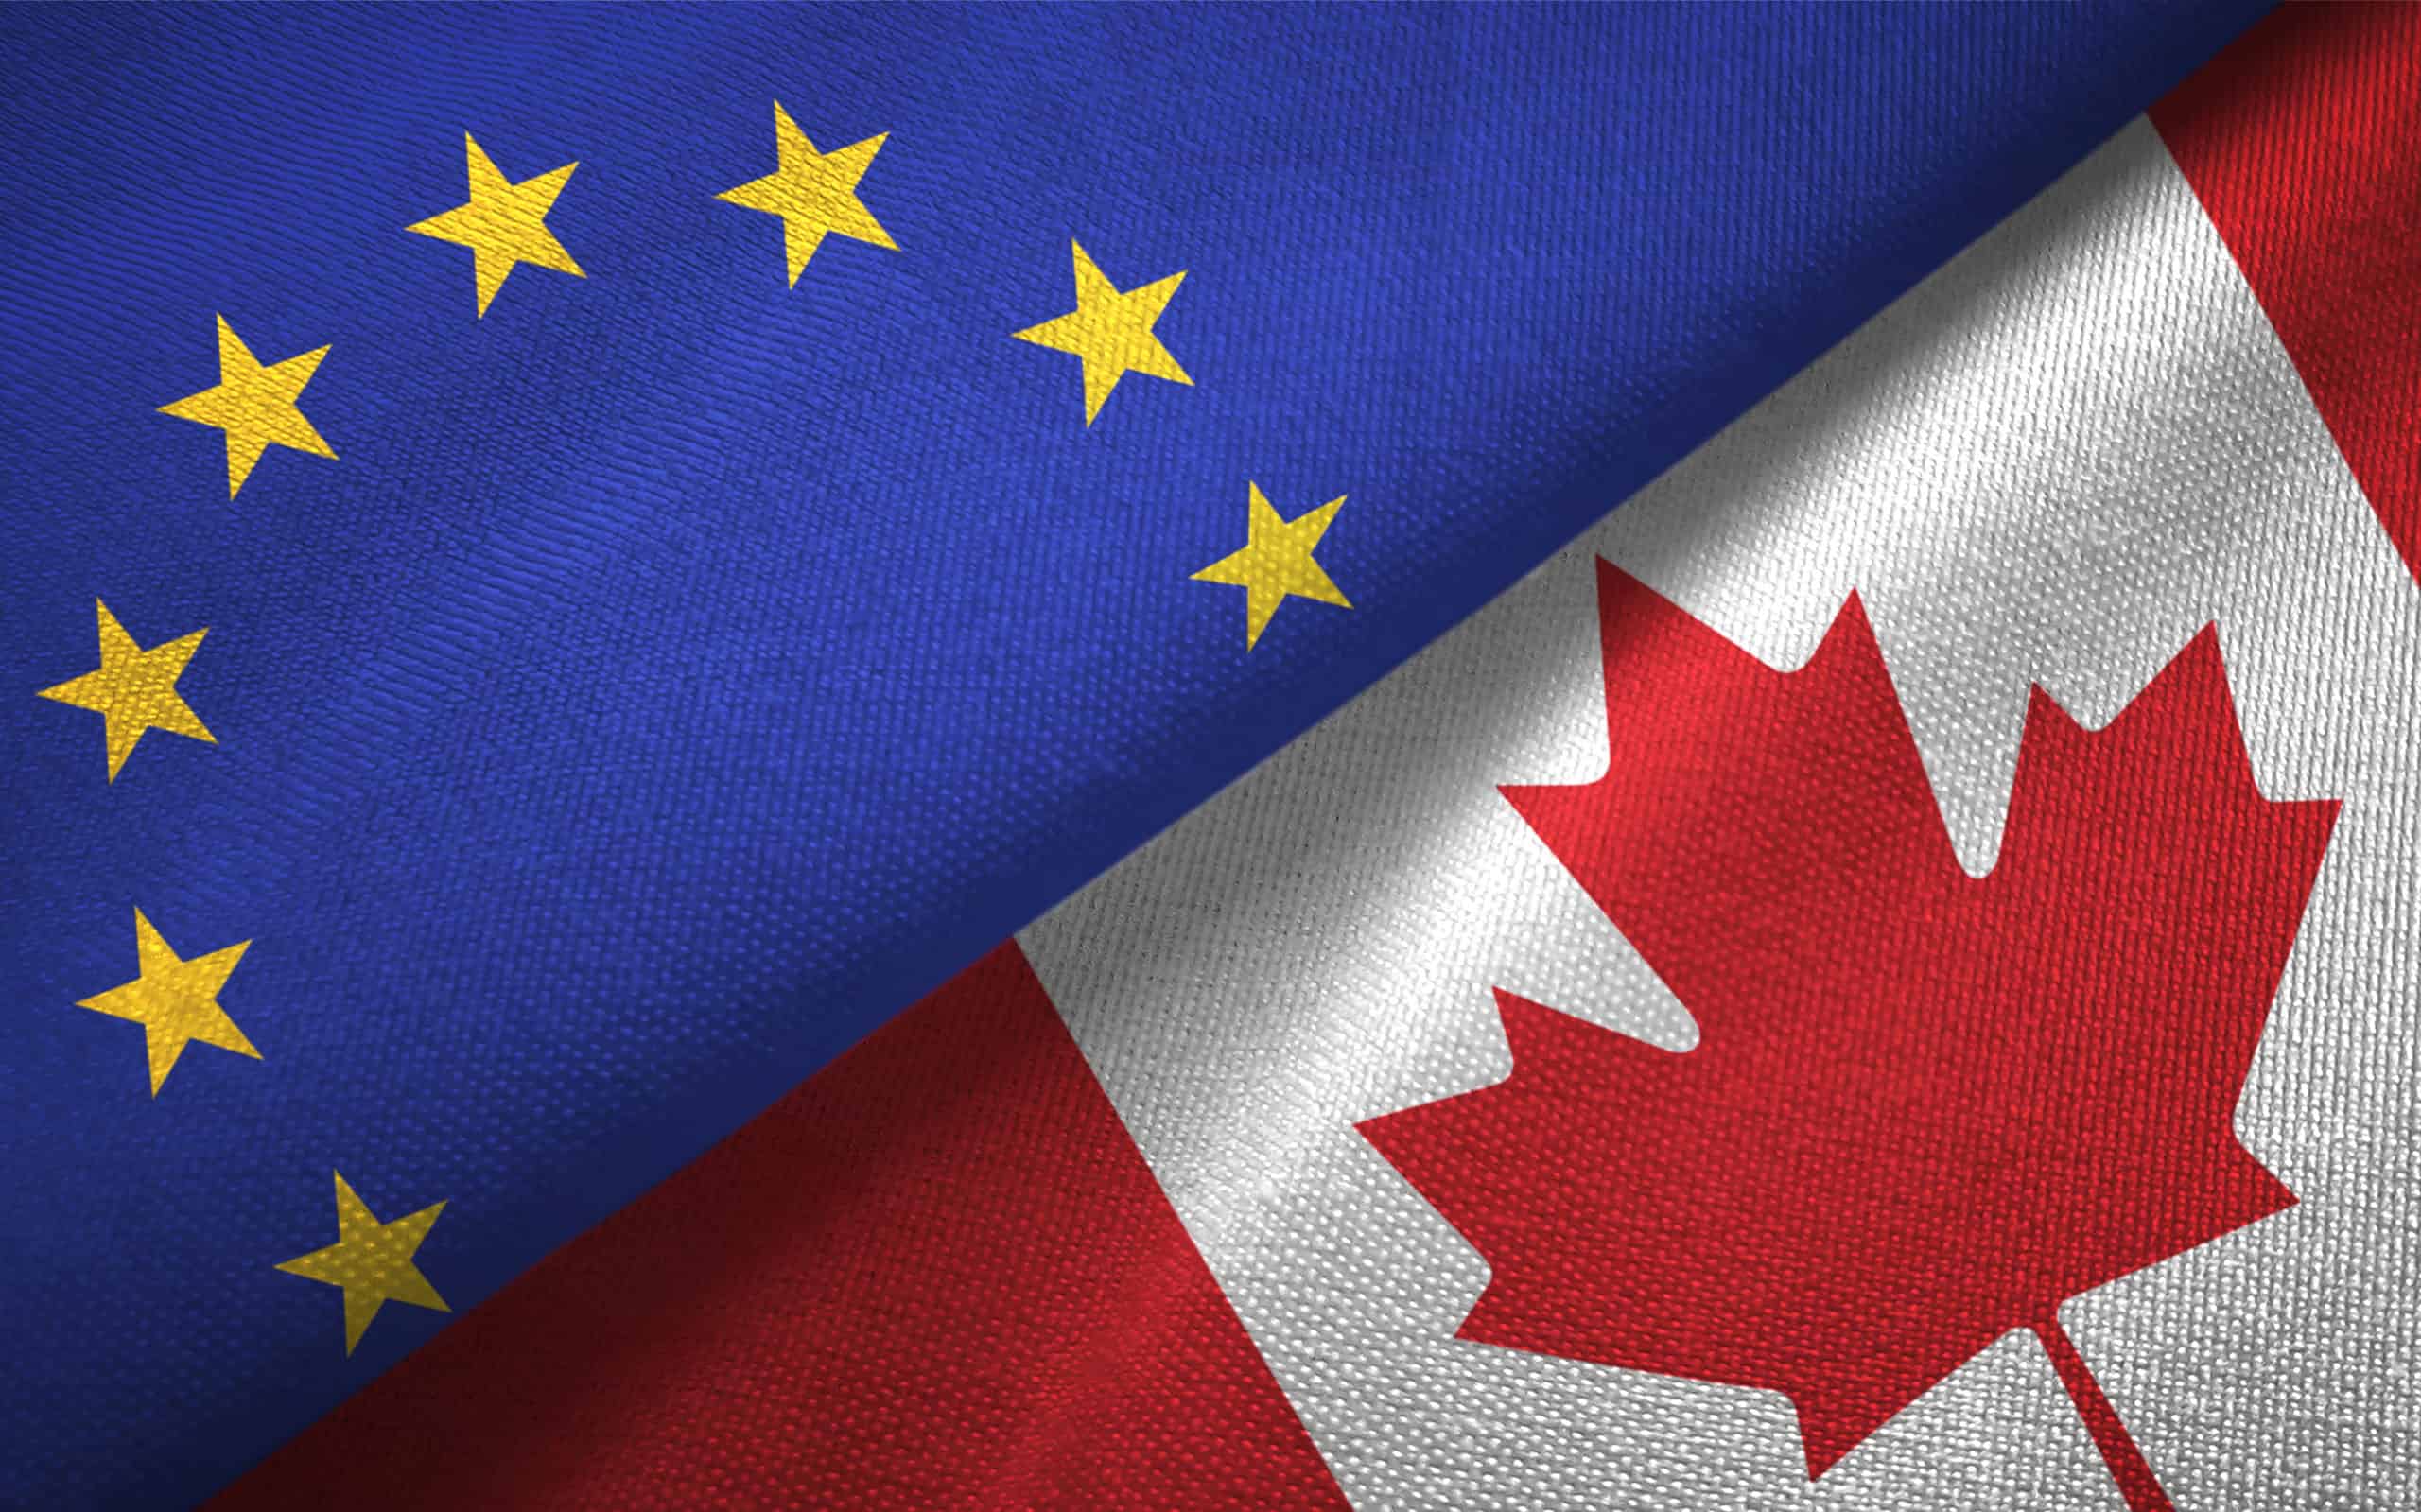 Canada and European Union two flags together realations textile cloth fabric texture